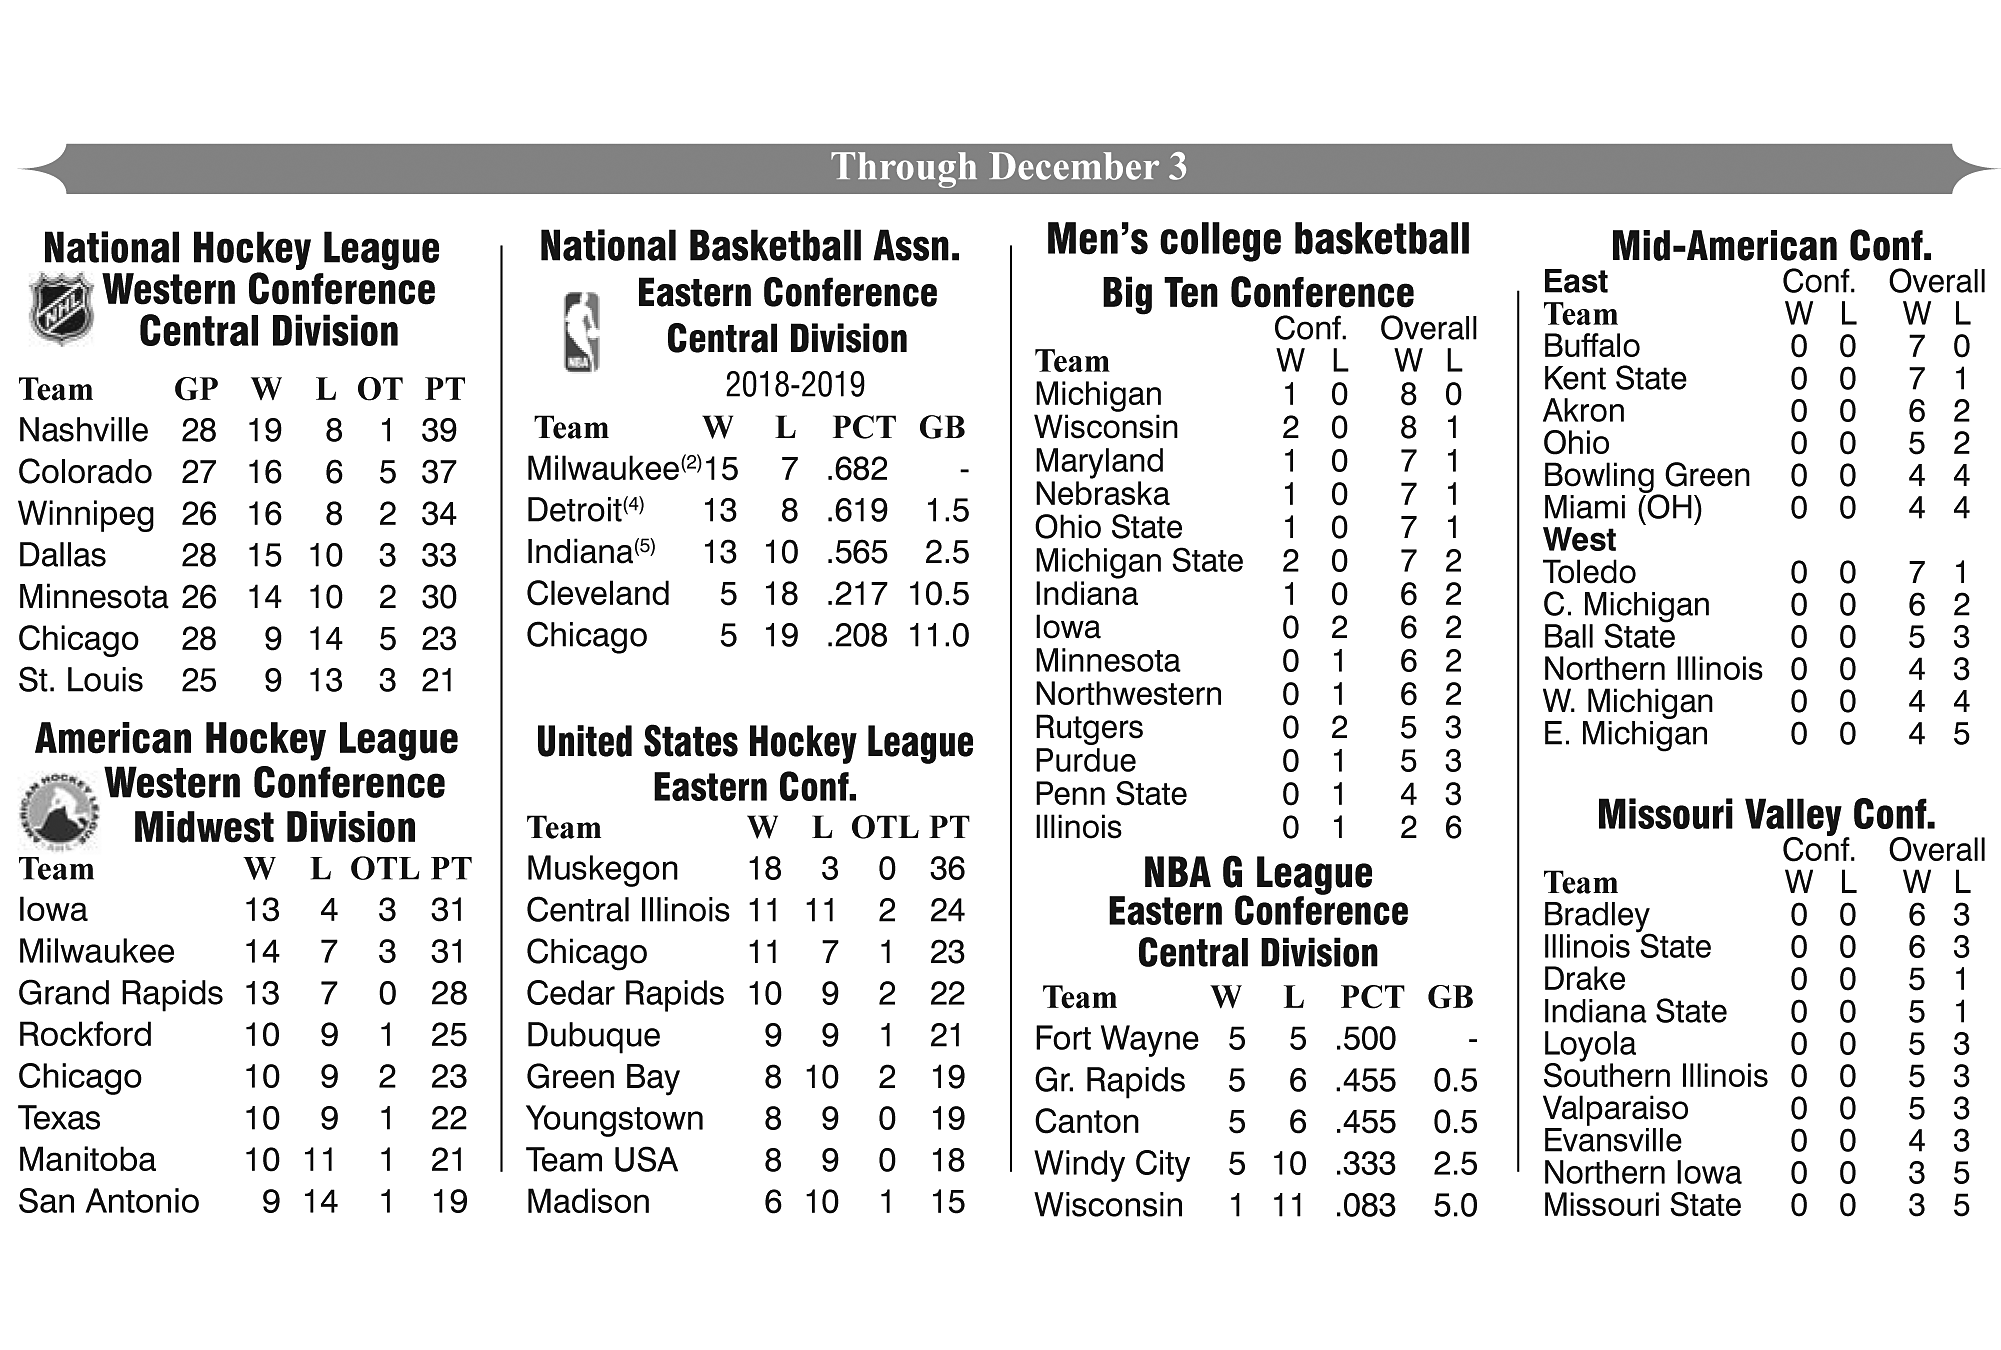 Professional Basketball and Hockey Standings Through December 3, 2018